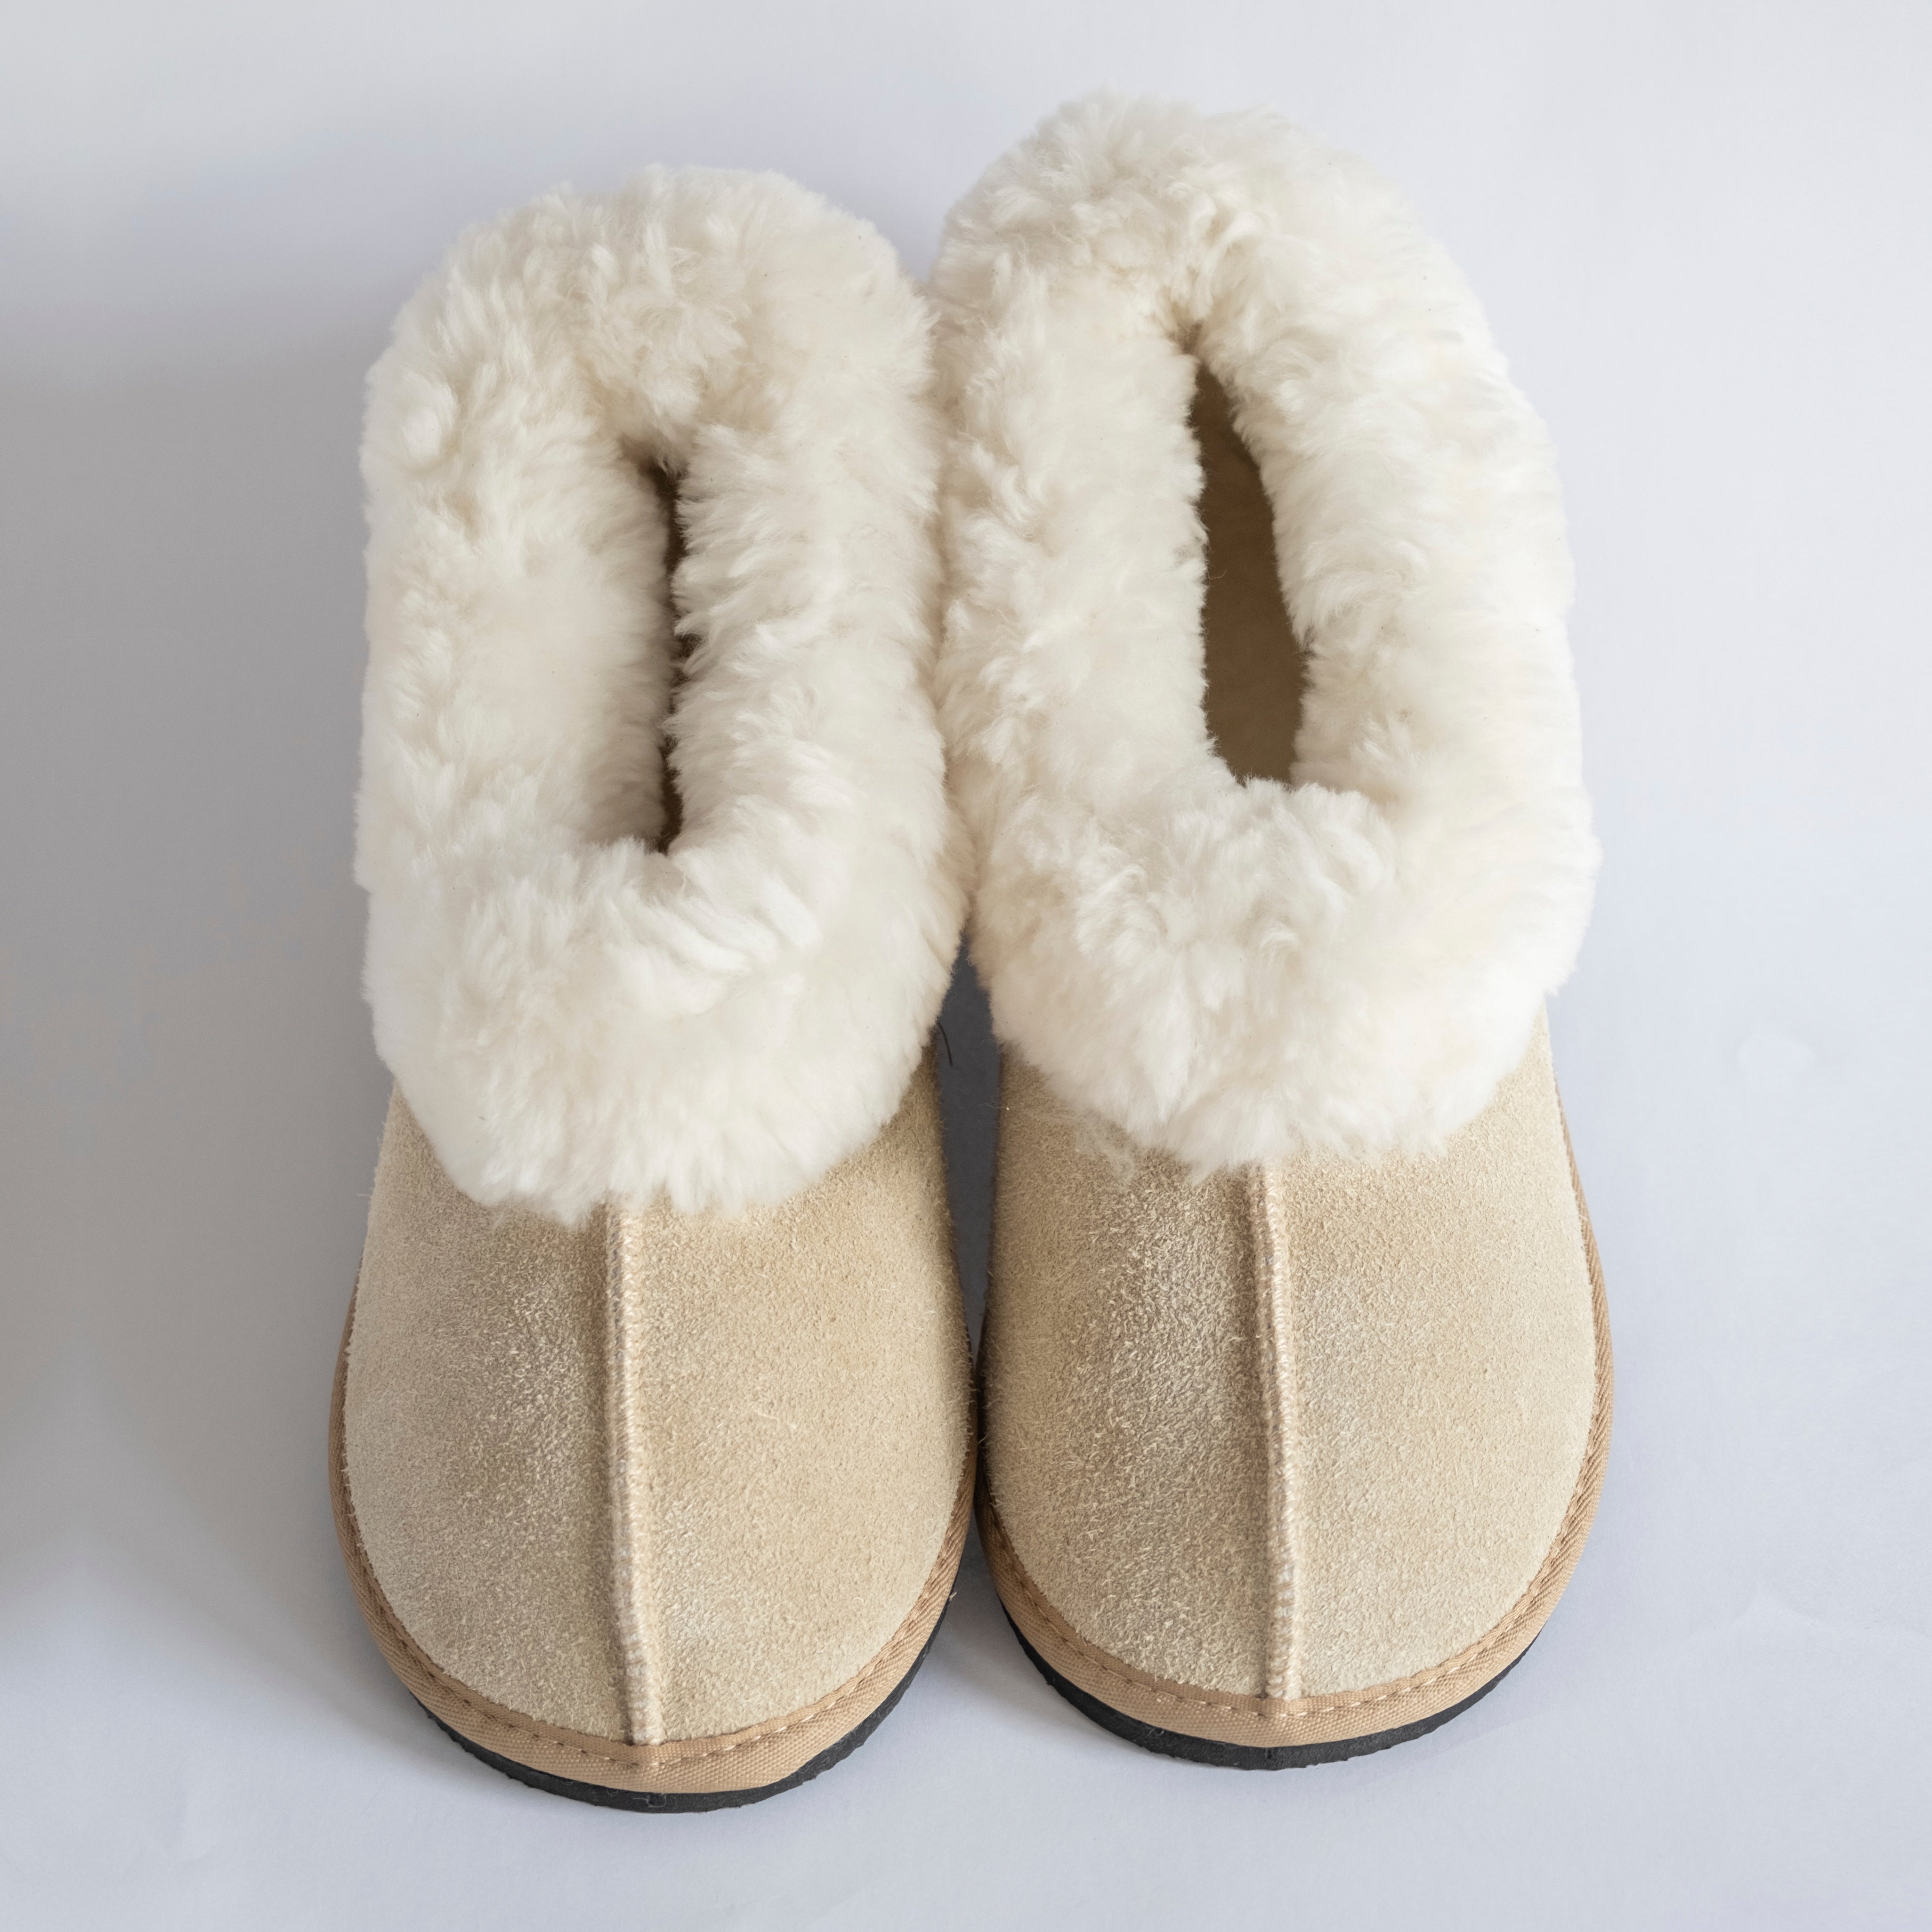 Full Sheep skin Slippers – the mohair mill shop